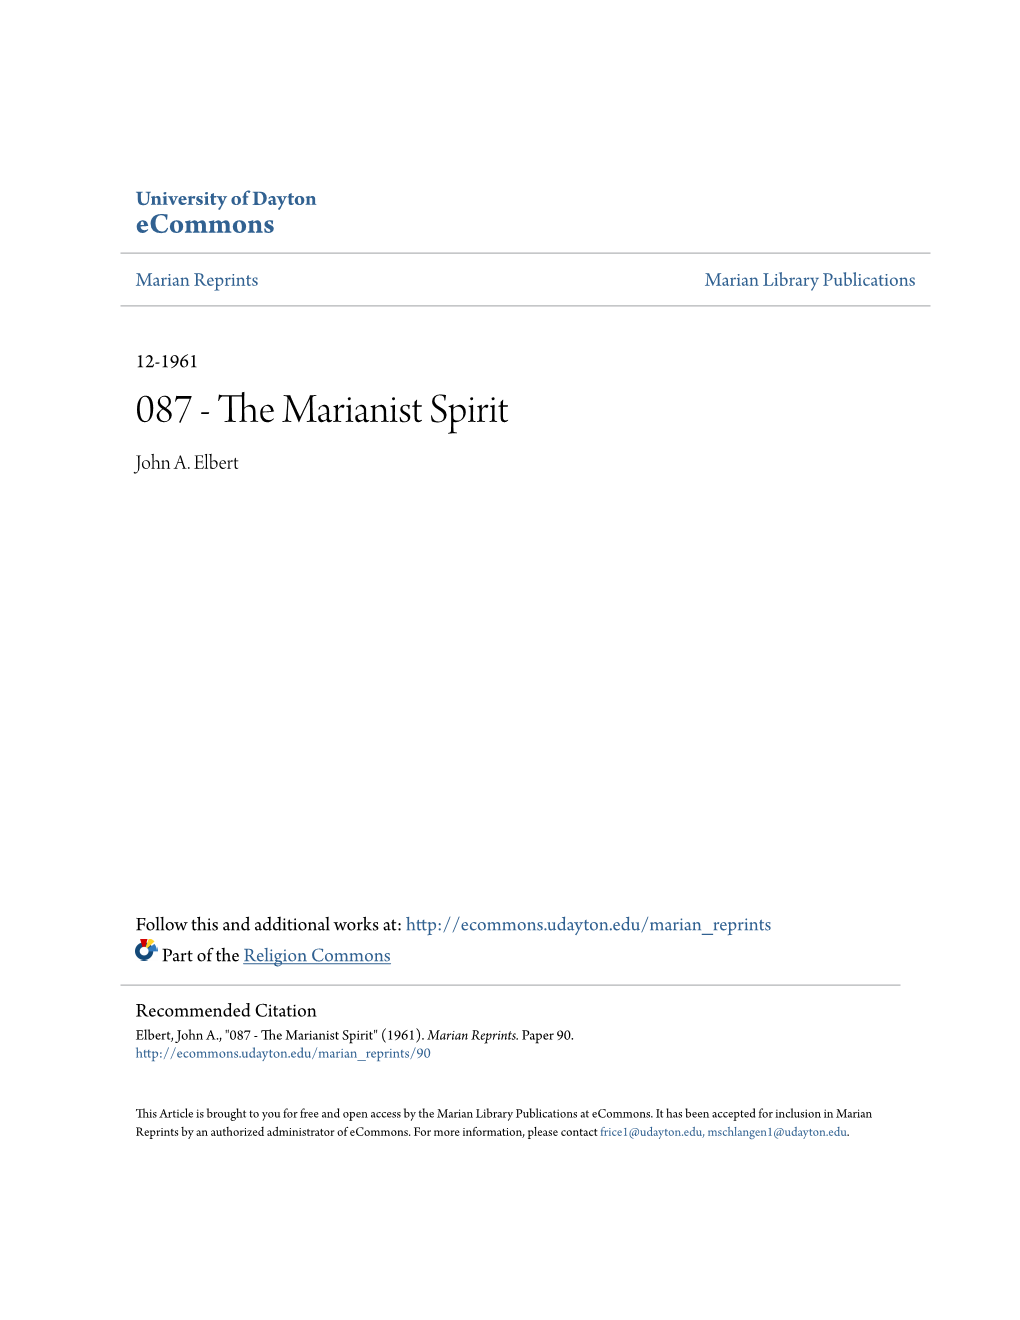 The Marianist Spirit Written in Commemoration of the Bicentennial of the Birth of William Joseph Chaminade, Founder of the Society of Mary (Marianists)